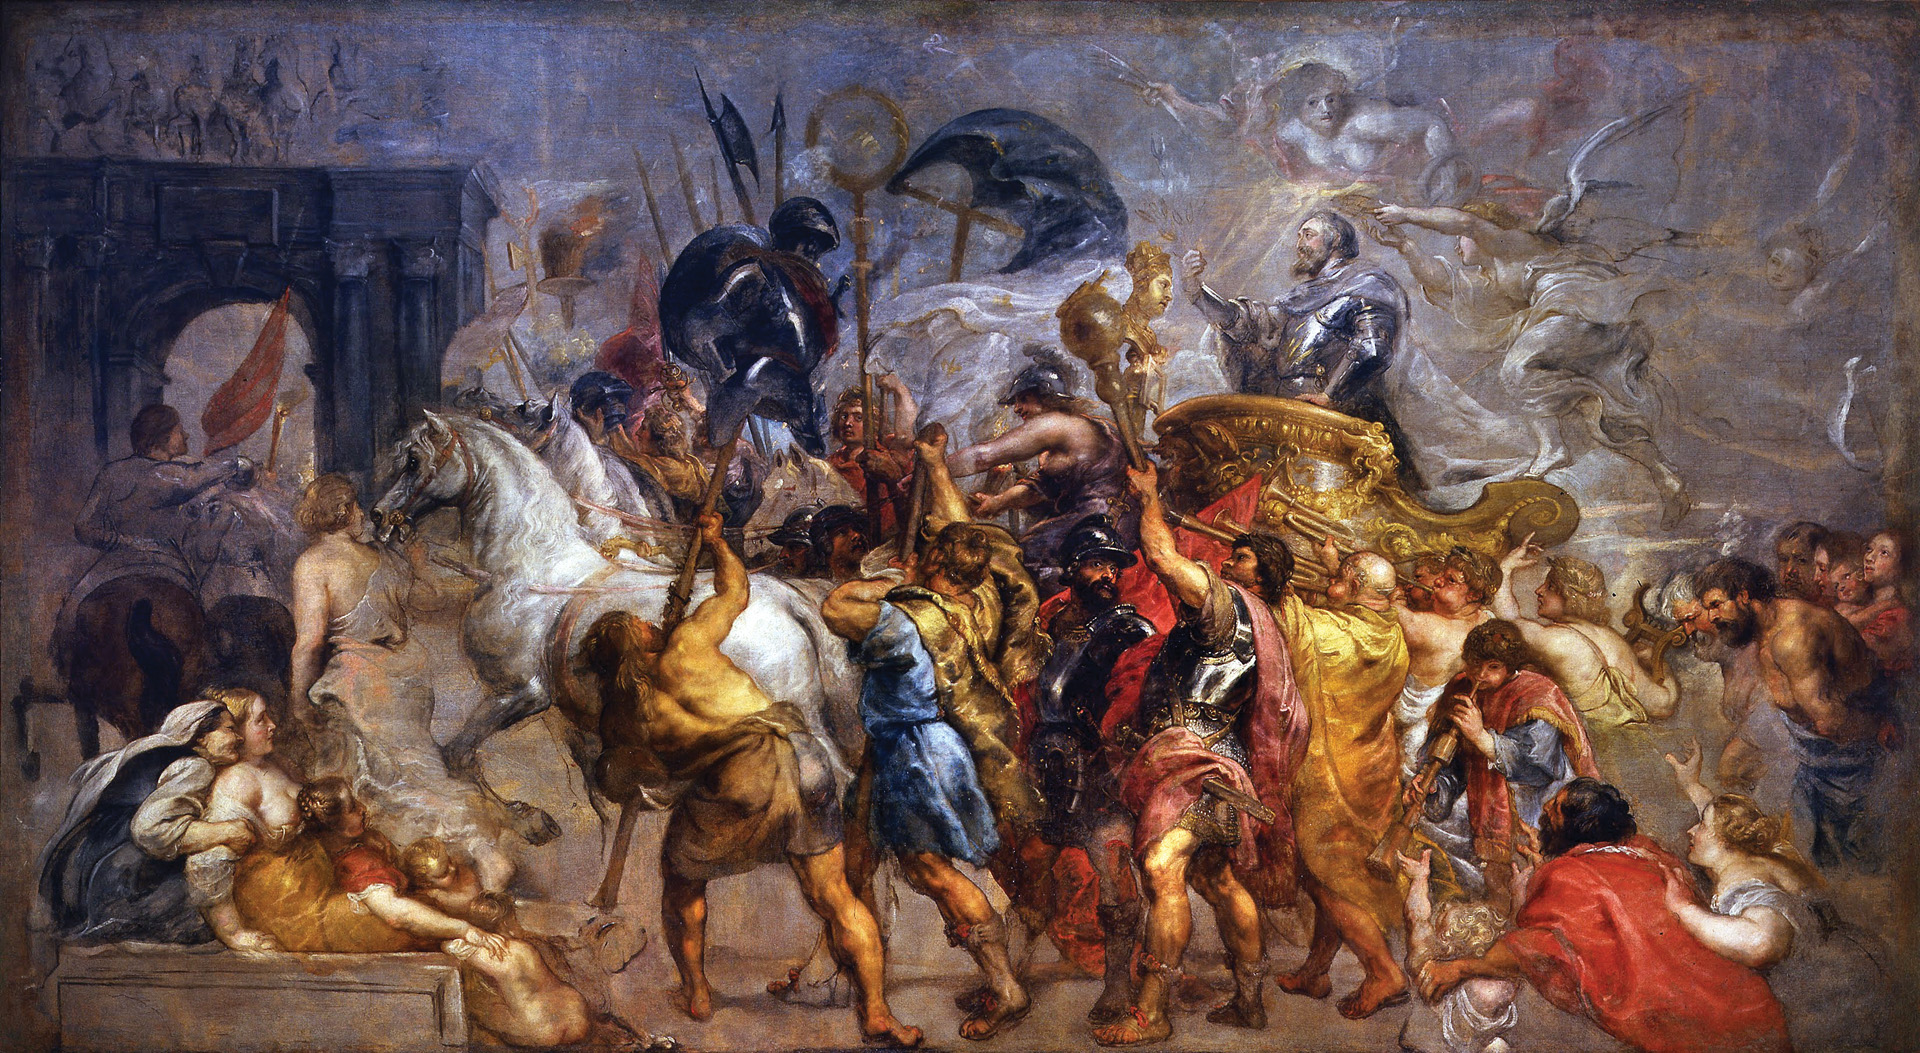 King Henry IV’s triumphant entry into Paris in 1594 is portrayed in a painting by Flemish Baroque artist Peter Paul Rubens. Despite his myriad shortcomings, “Henri-Quatre” remains one of France’s most popular kings.